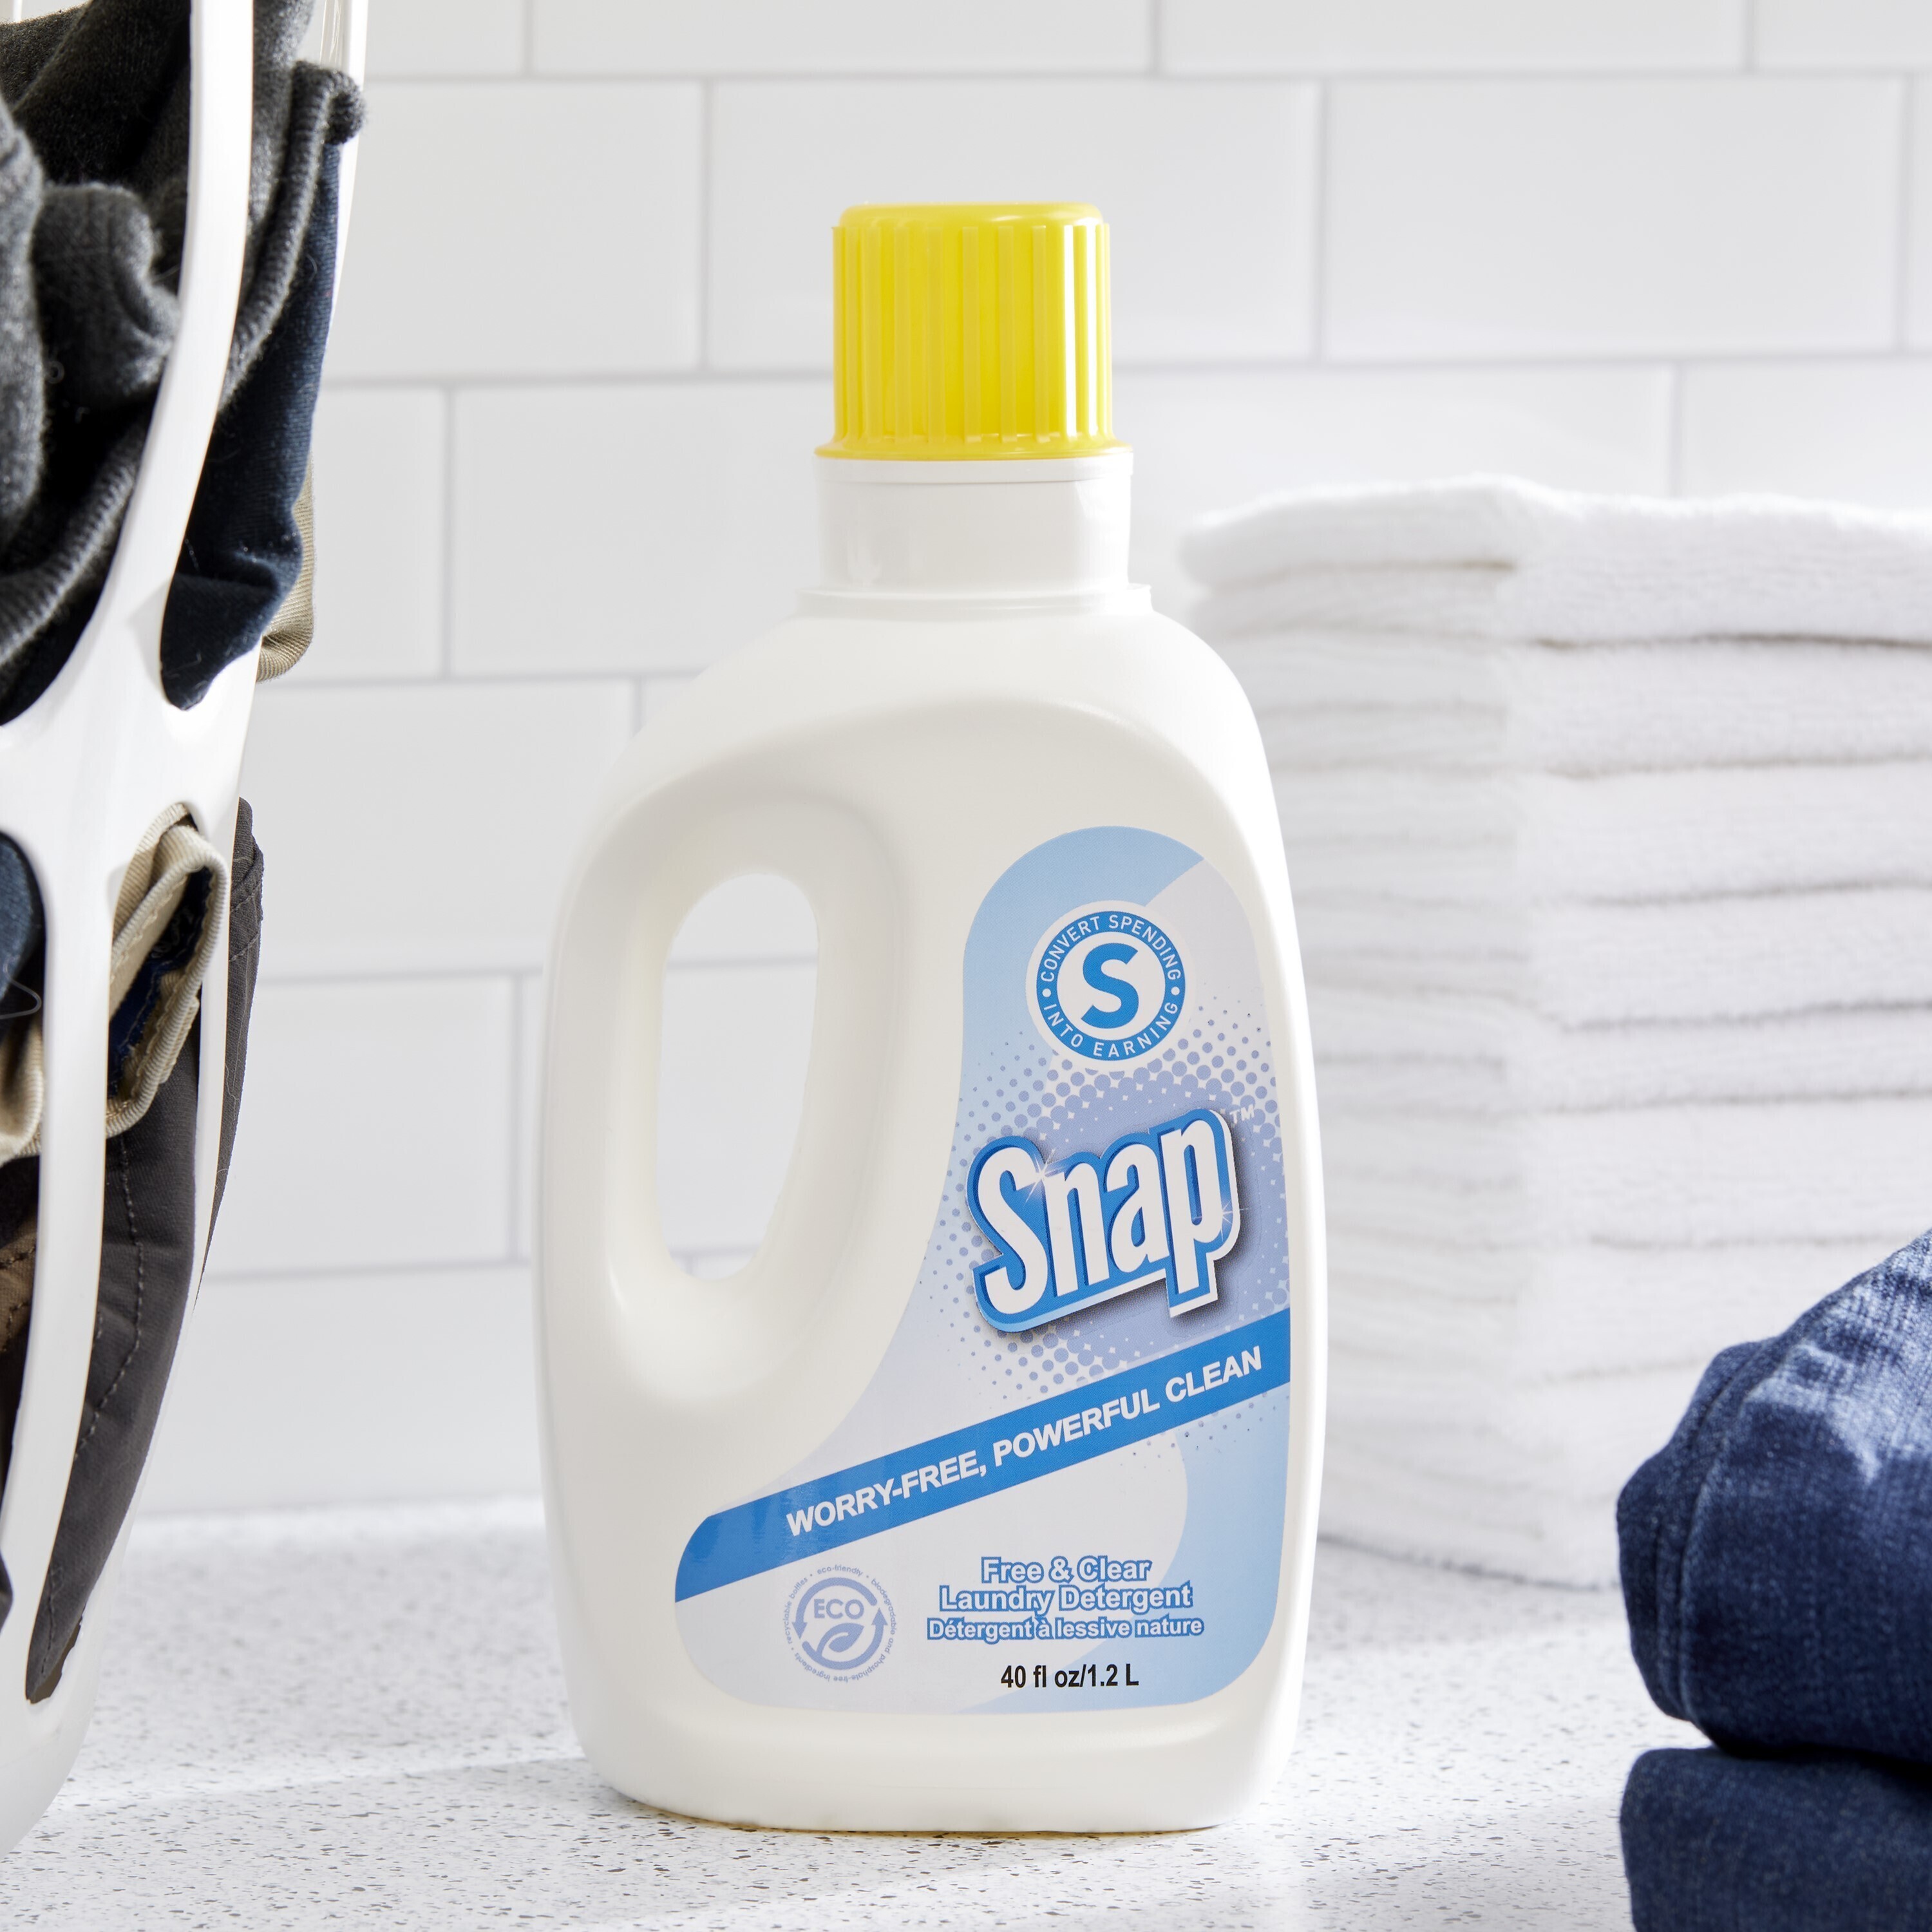 Shopping Annuity&#174; Brand SNAP&#174; Free & Clear Laundry Detergent alternate image